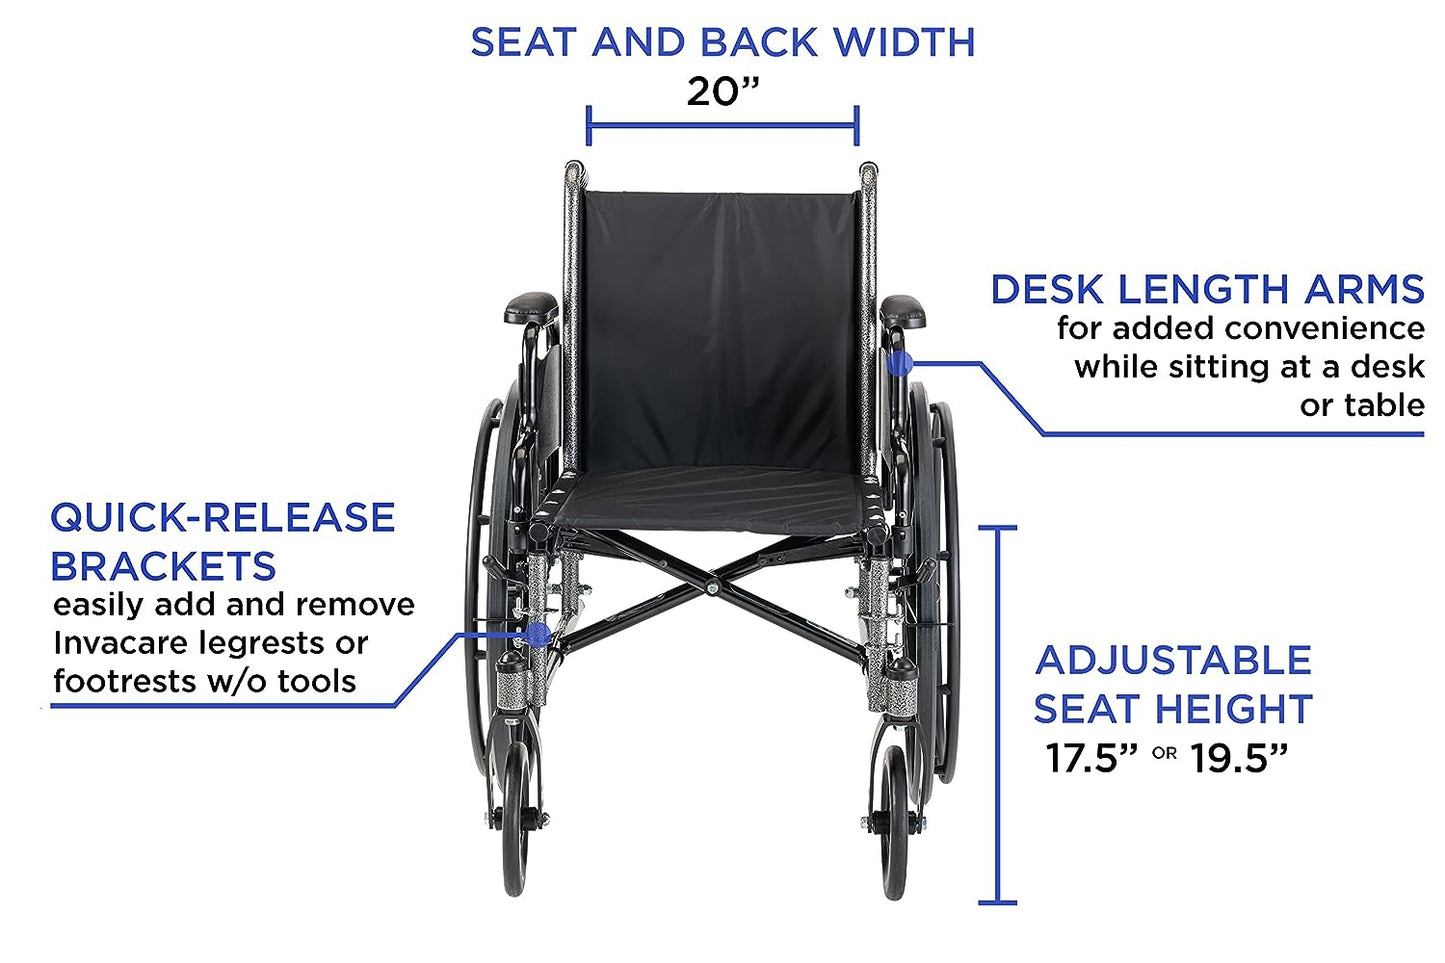 A front view of Invacare's Tracer SX5 wheelchair for adults.  The image list features to include quick-release brackets to install frontriggings with no tools, desk-length armpads for convenience while sitting at desk or table, adjustable seat height of 17.5" or 19.5".  The image is on a white background.